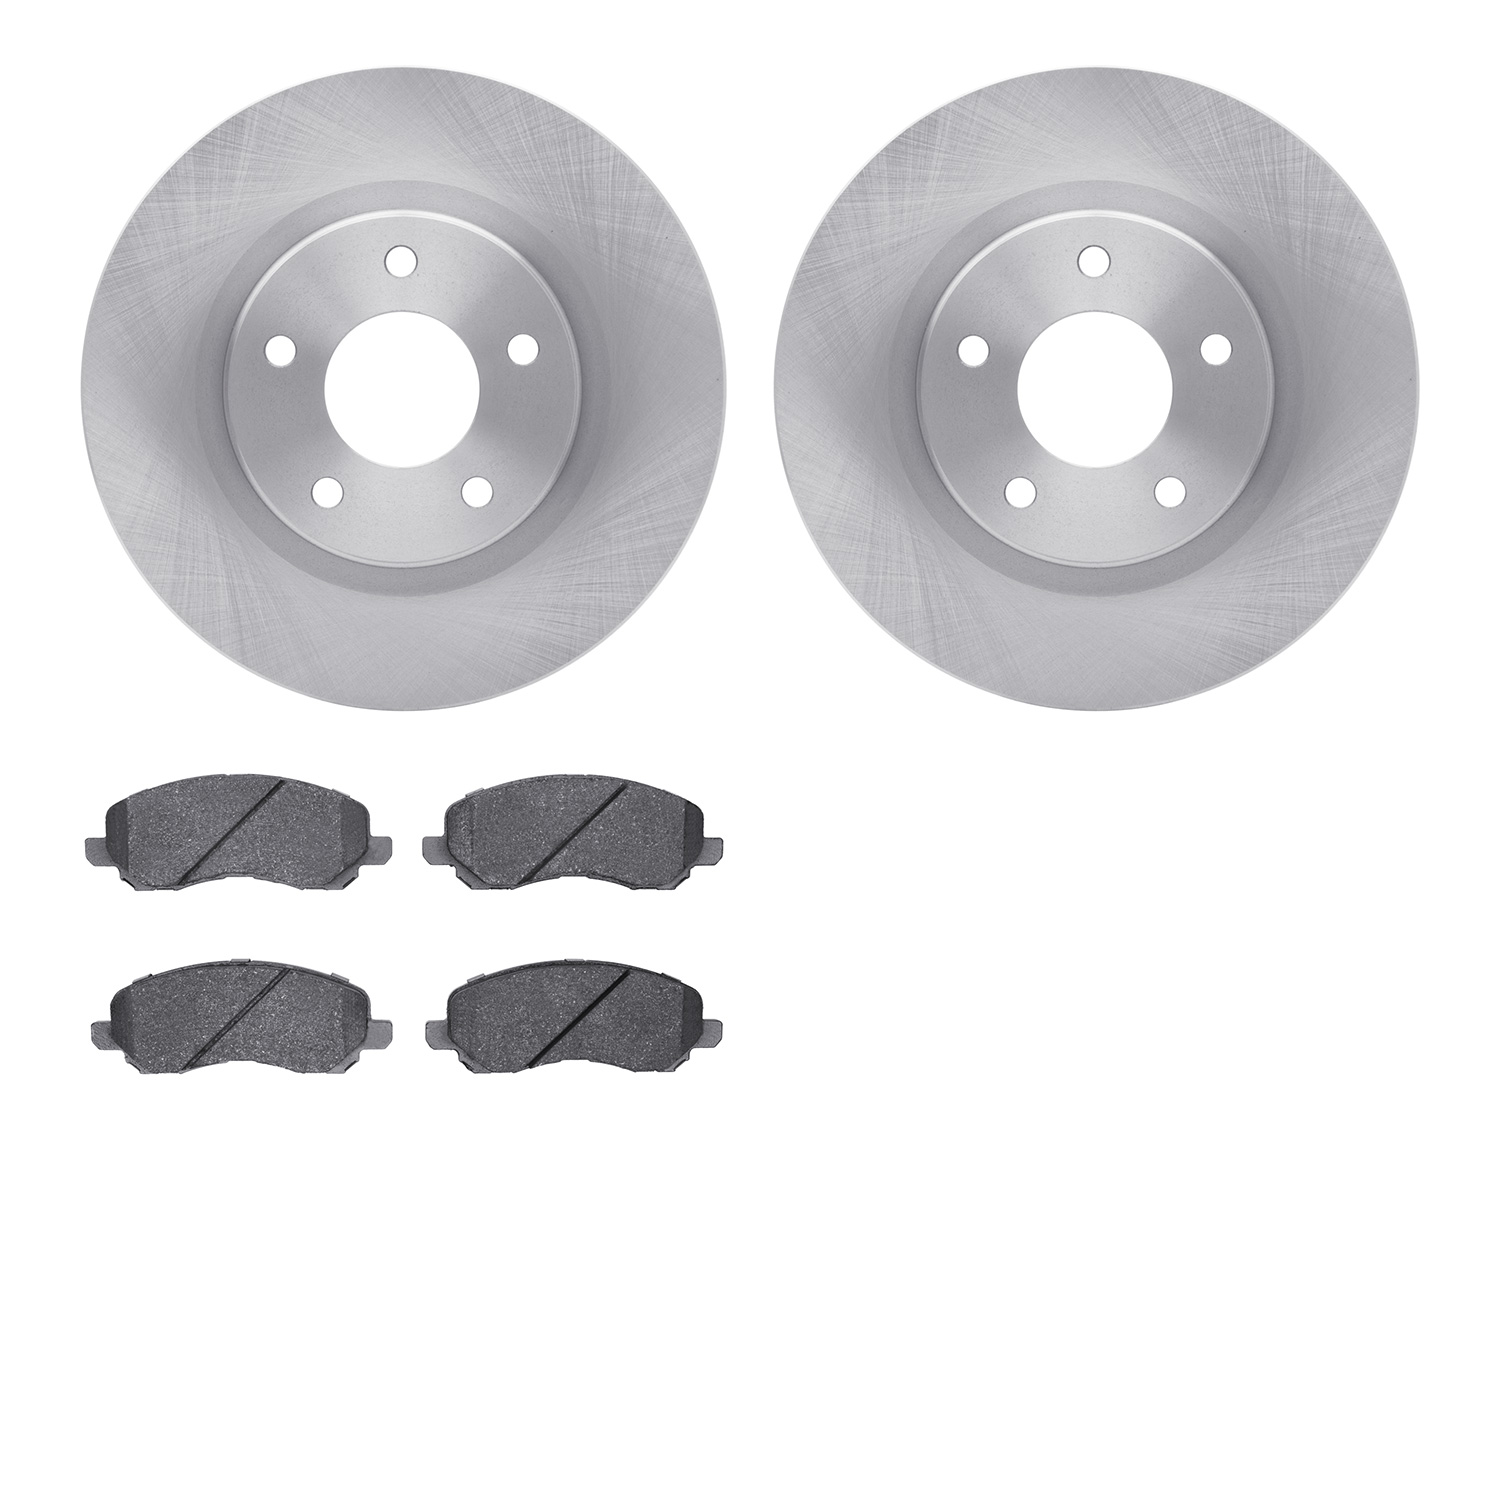 6302-39026 Brake Rotors with 3000-Series Ceramic Brake Pads Kit, Fits Select Multiple Makes/Models, Position: Front